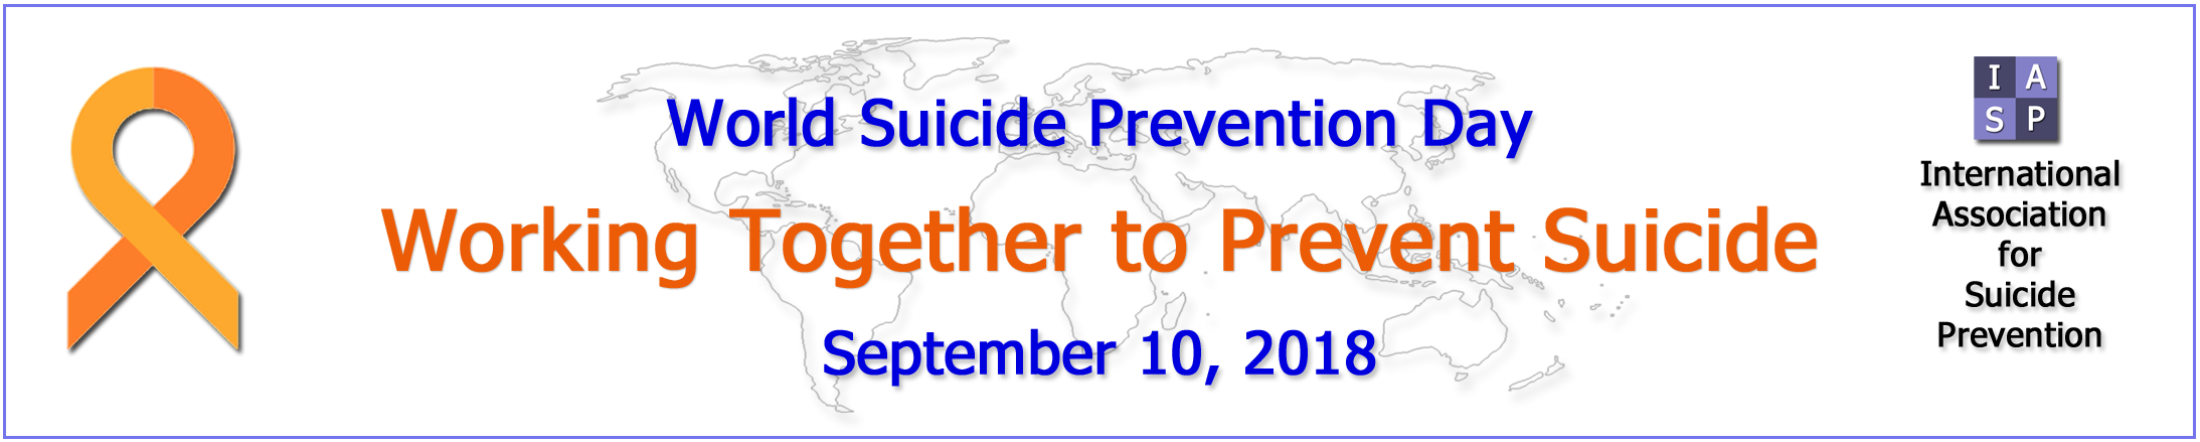 World Suicide Prevention Day poster 